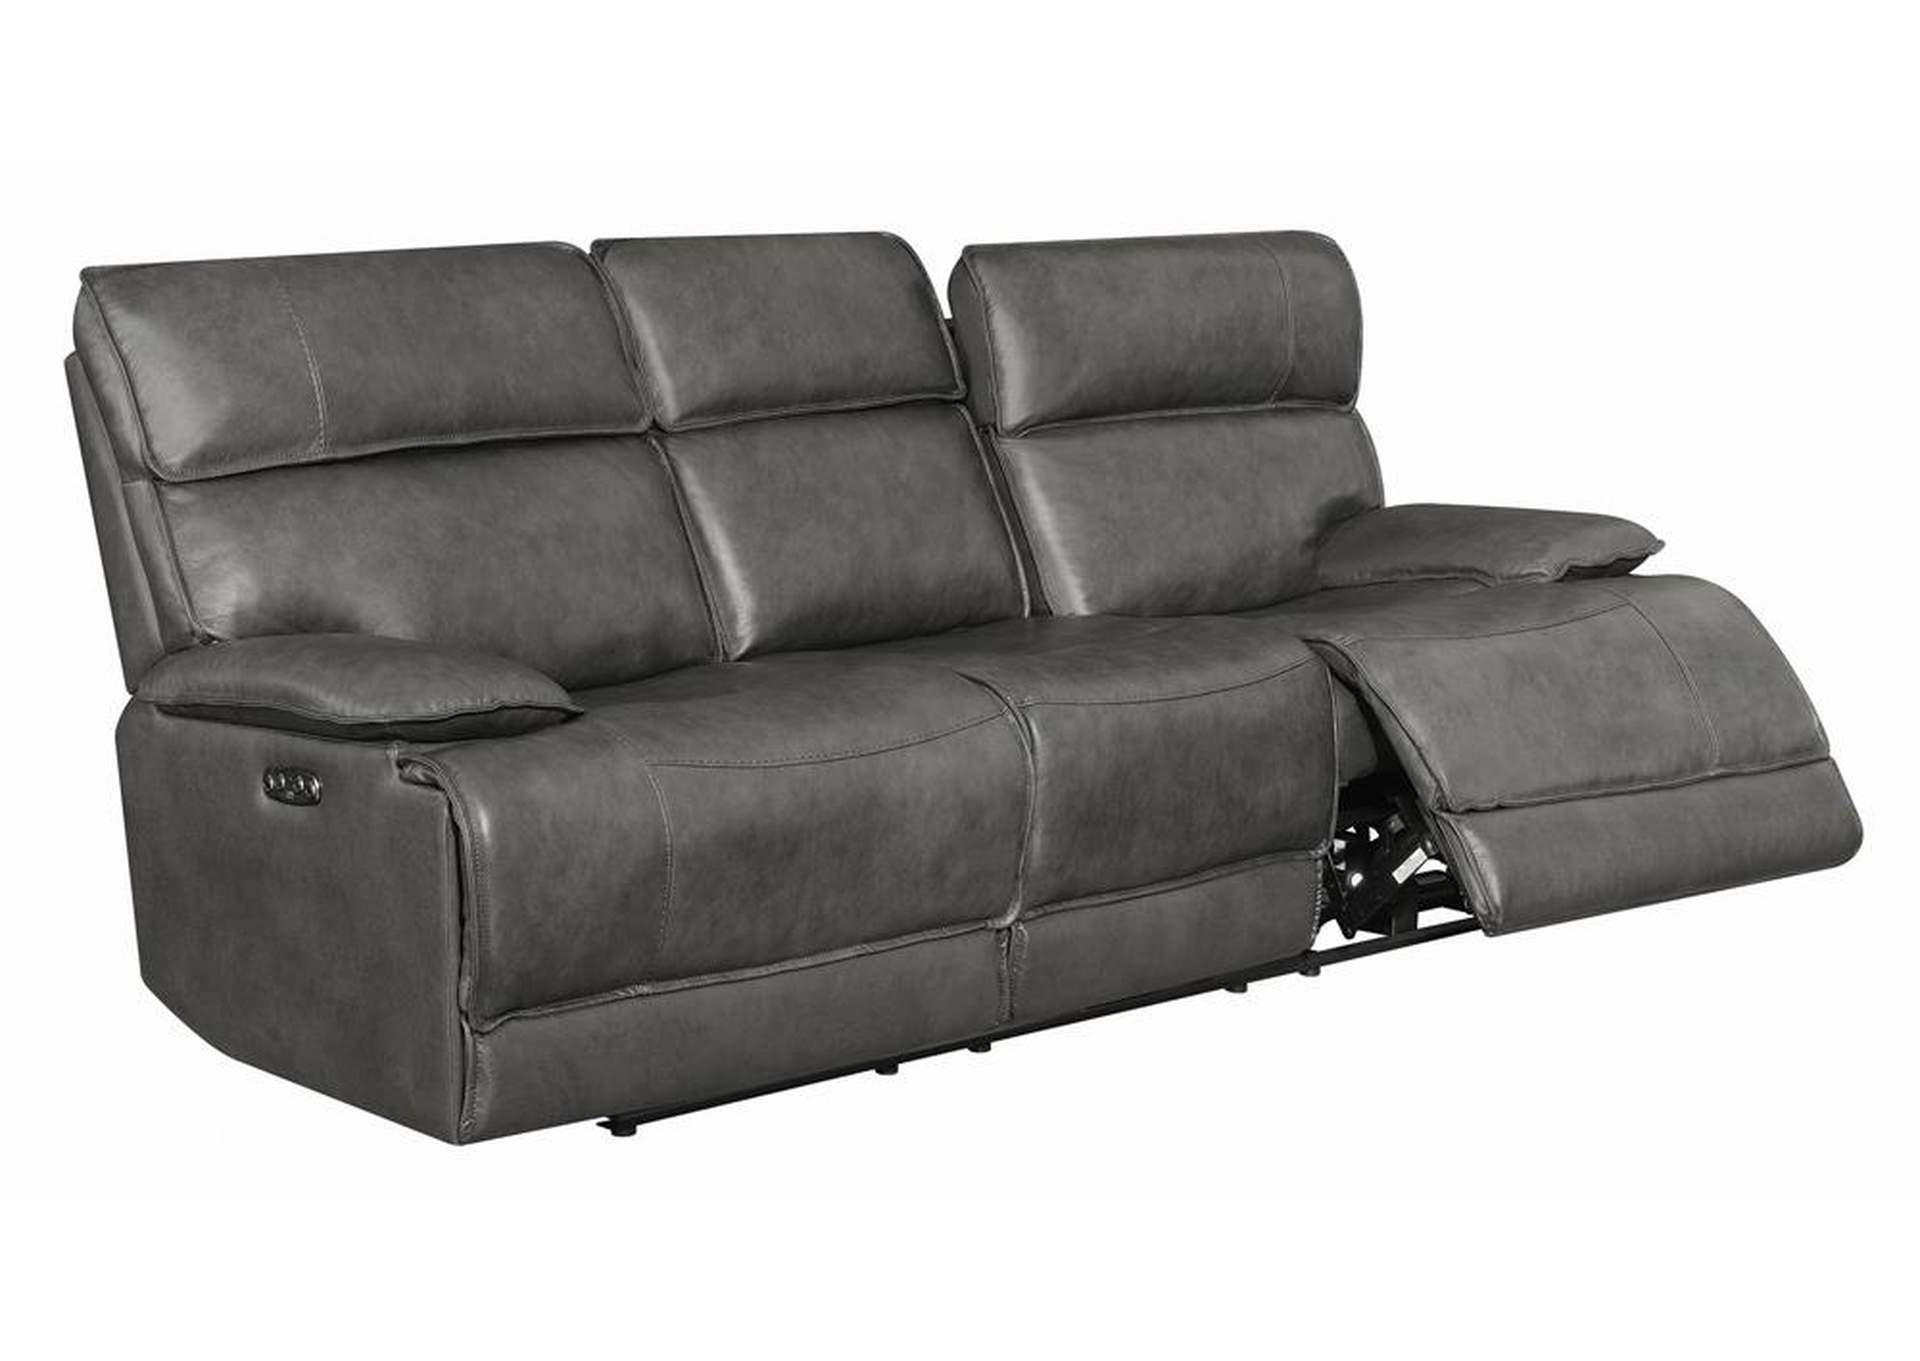 Chicago Standford Casual Charcoal Power Sofa,Coaster Furniture